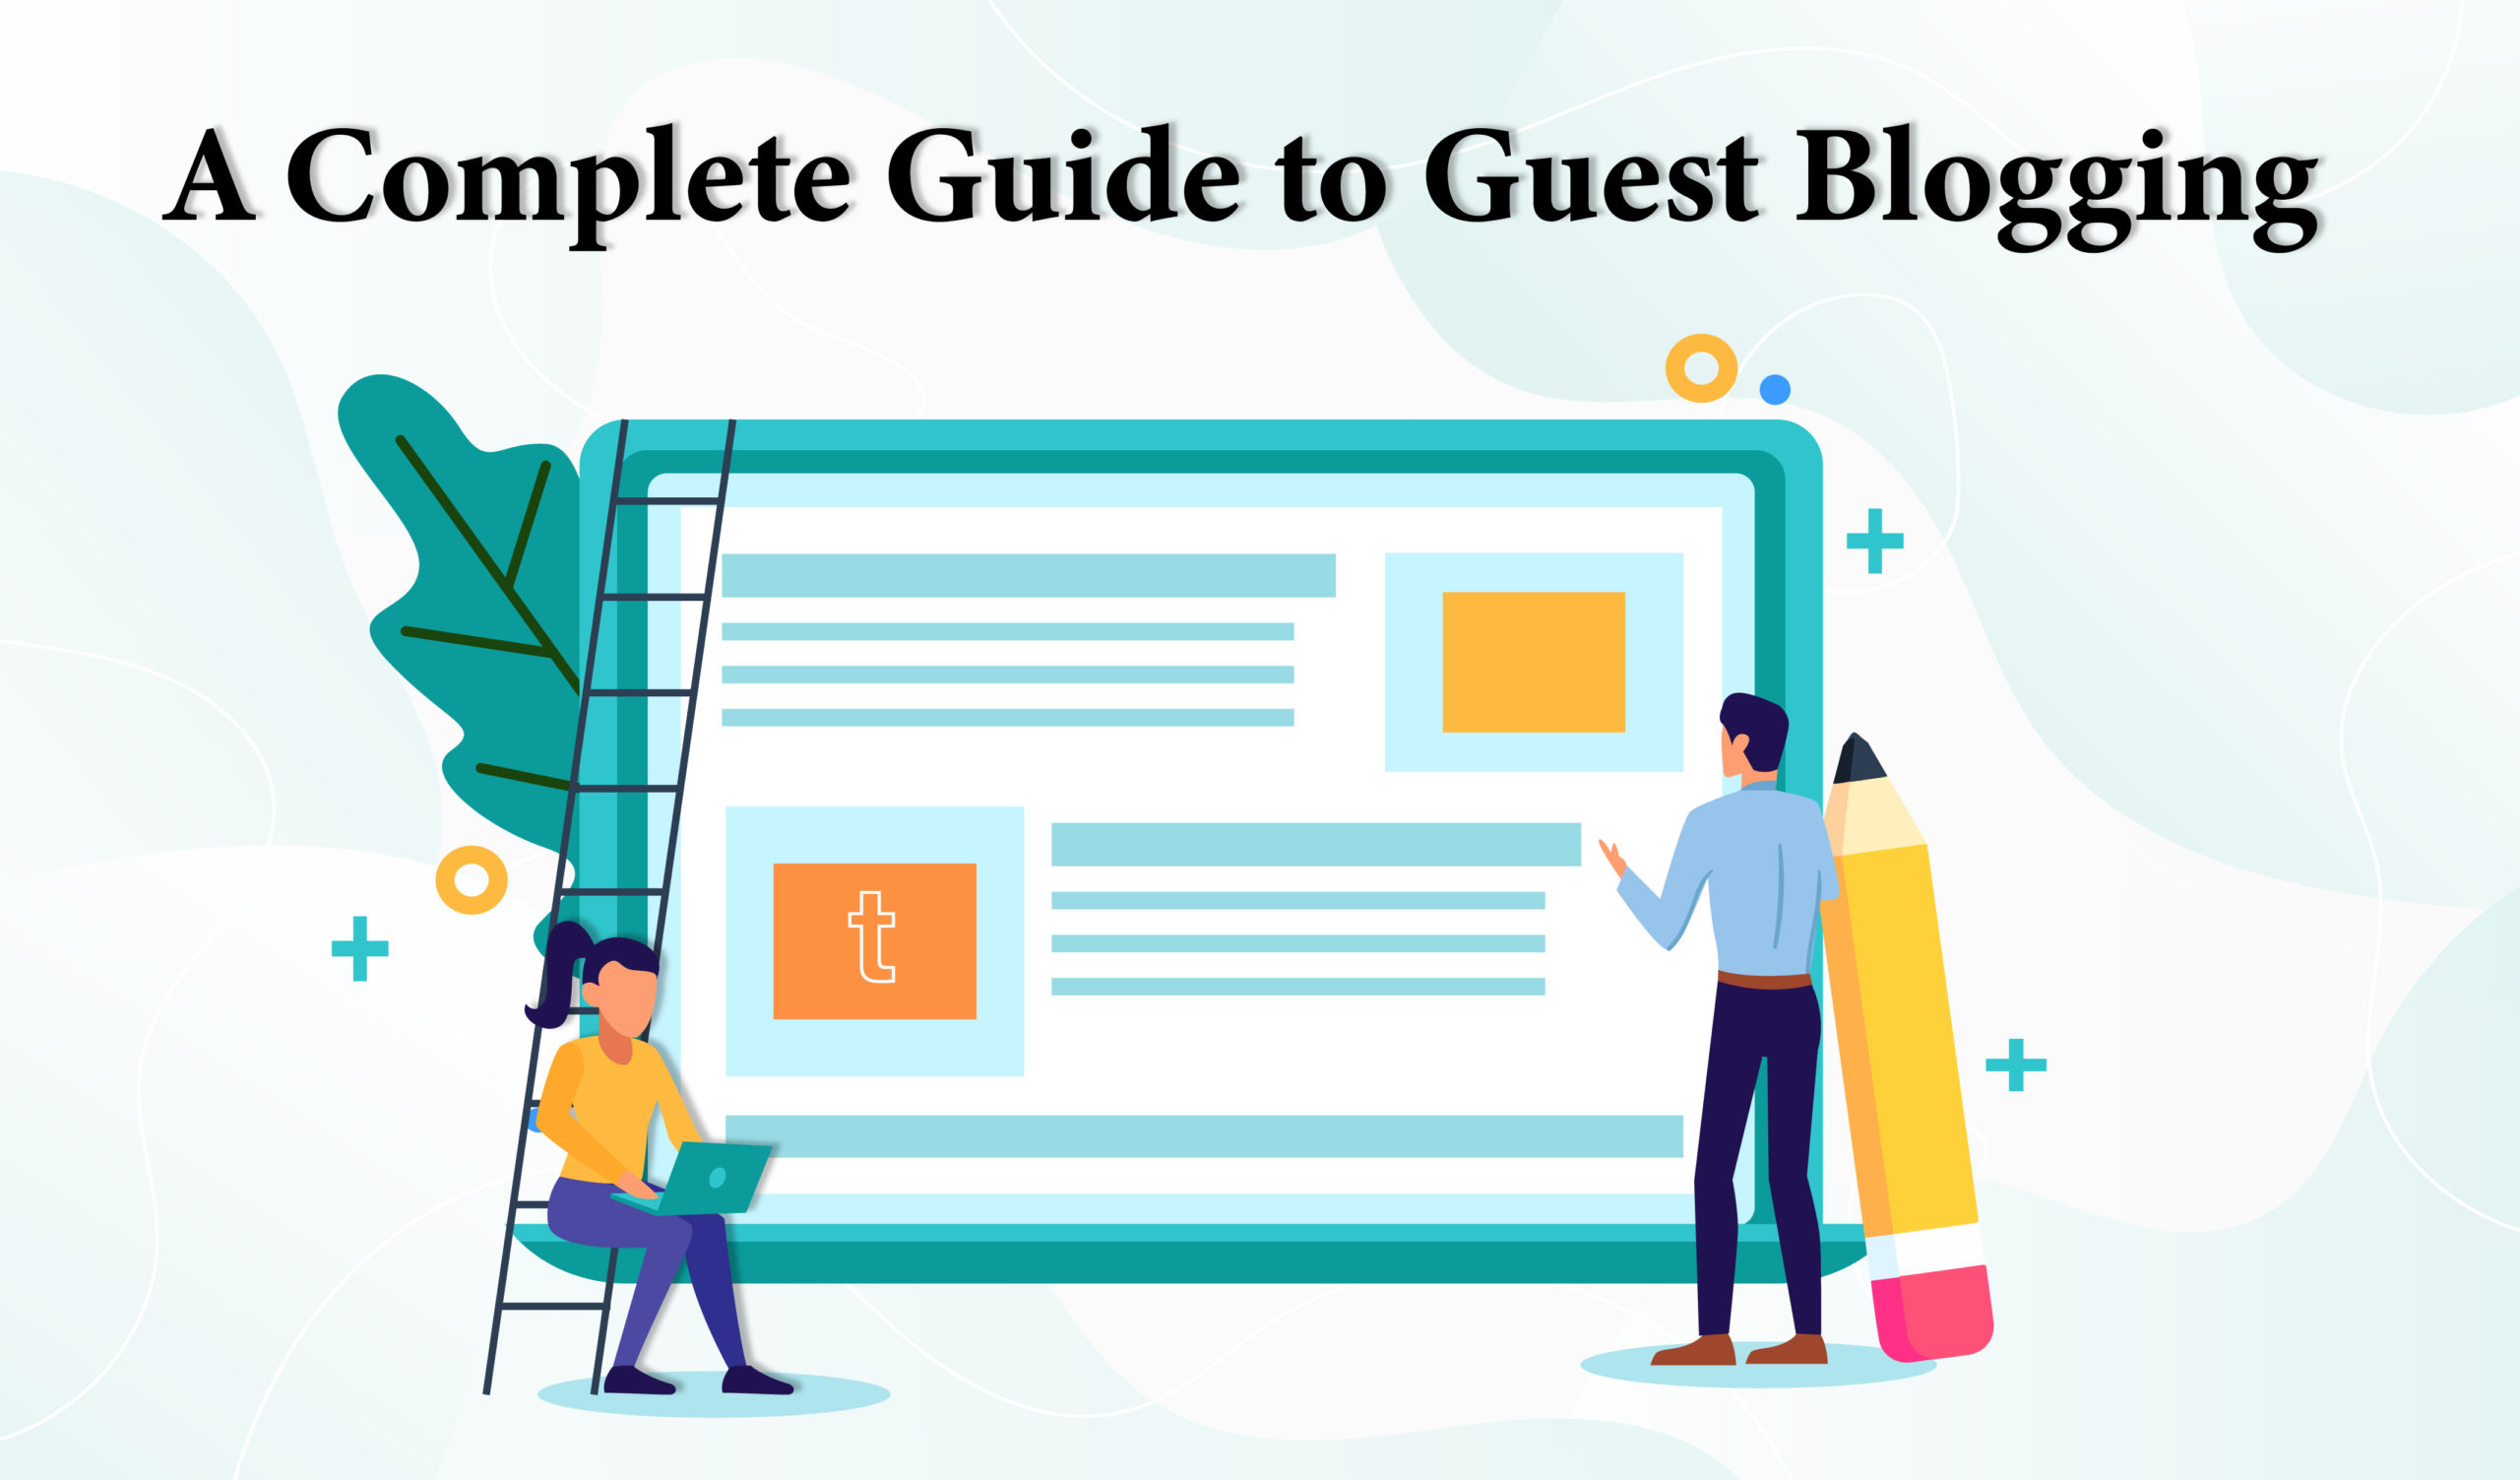 A Complete Guide to Guest Blogging